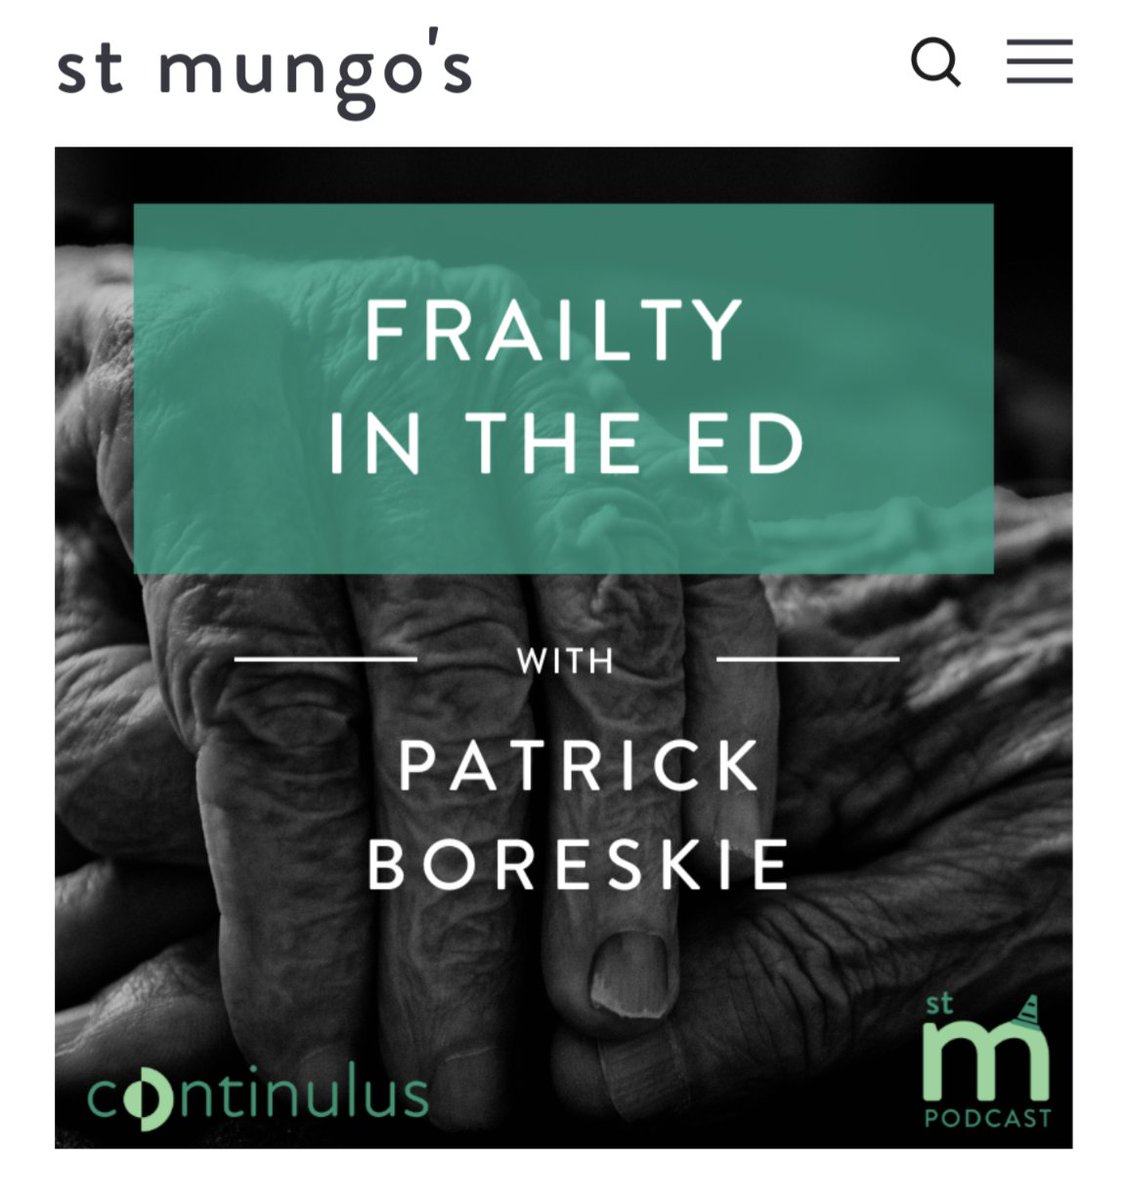 Honored to be asked by @eoghan_colgan to be a guest on the St Mungos podcast, highlighting a lecture on @continulus #Frailty in the emergency medicine setting #foamed